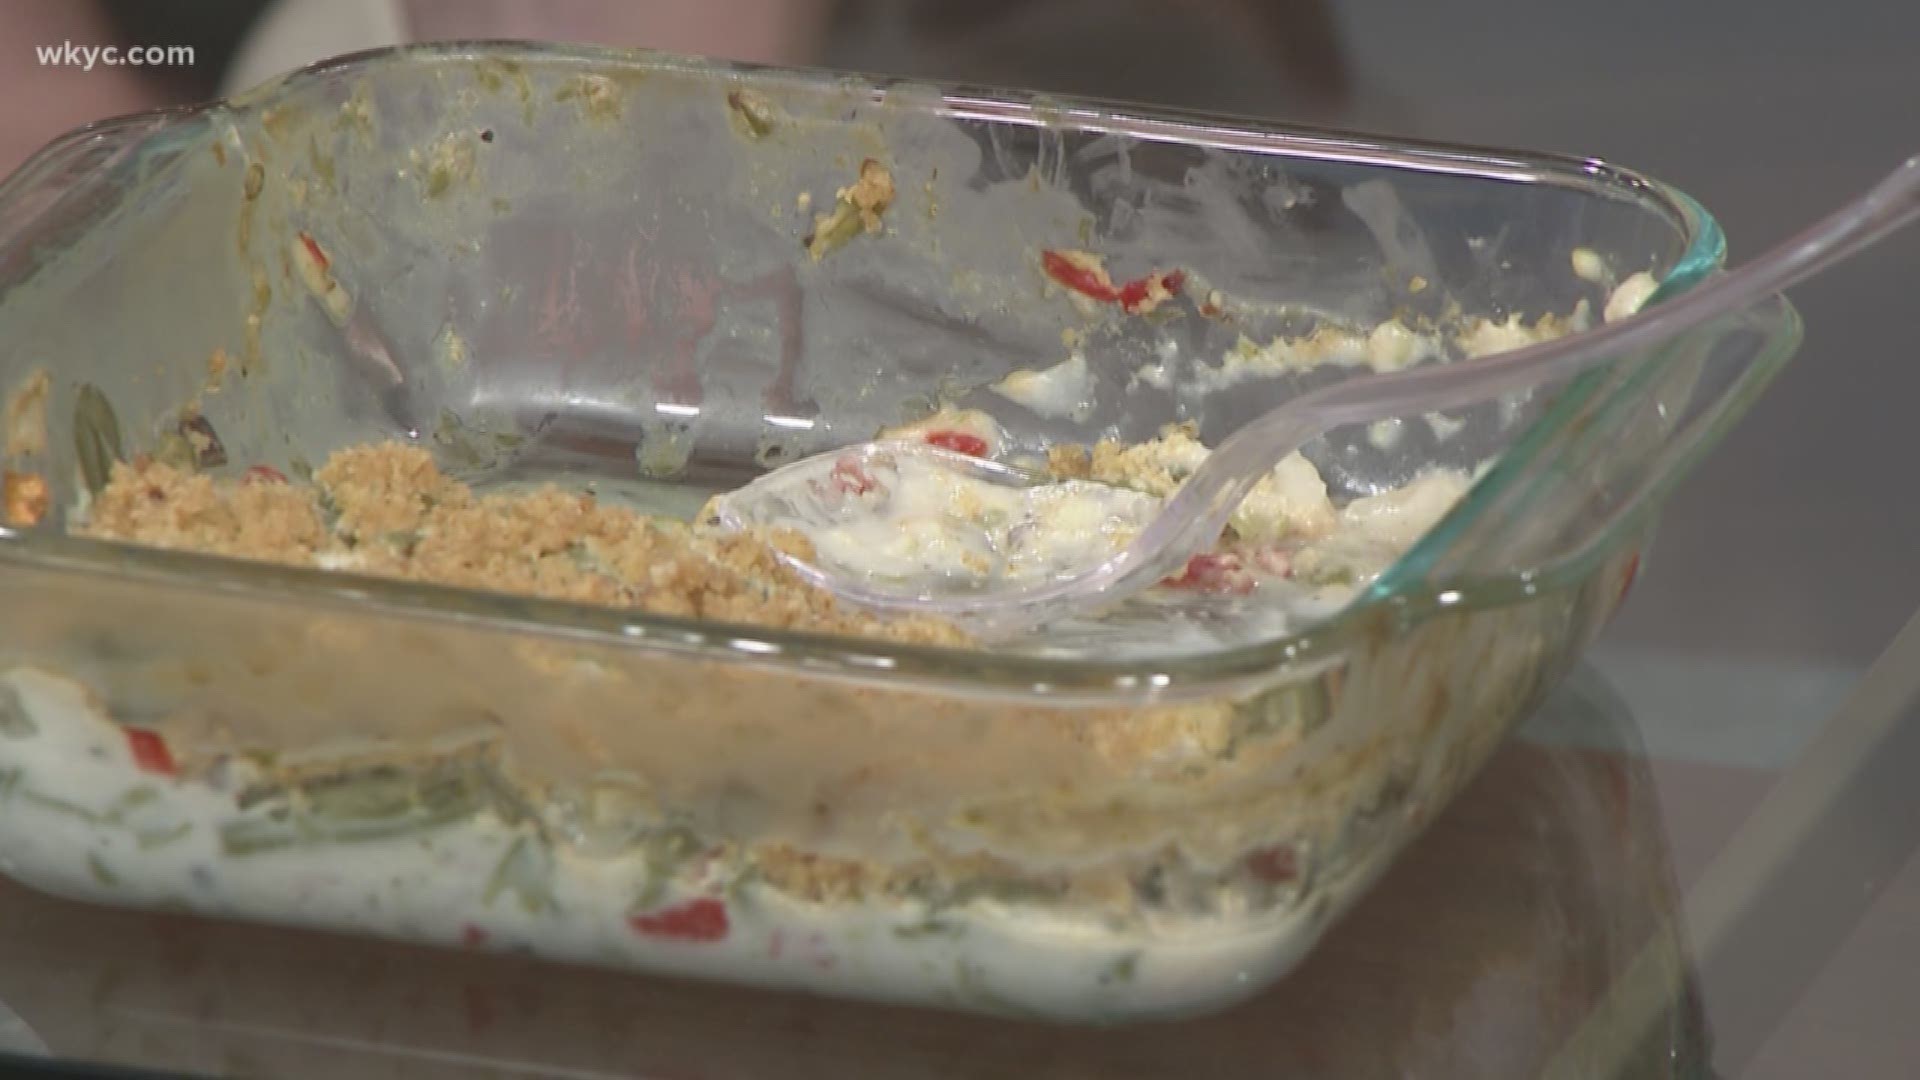 Dave and his wife both made their own versions of green bean casserole.